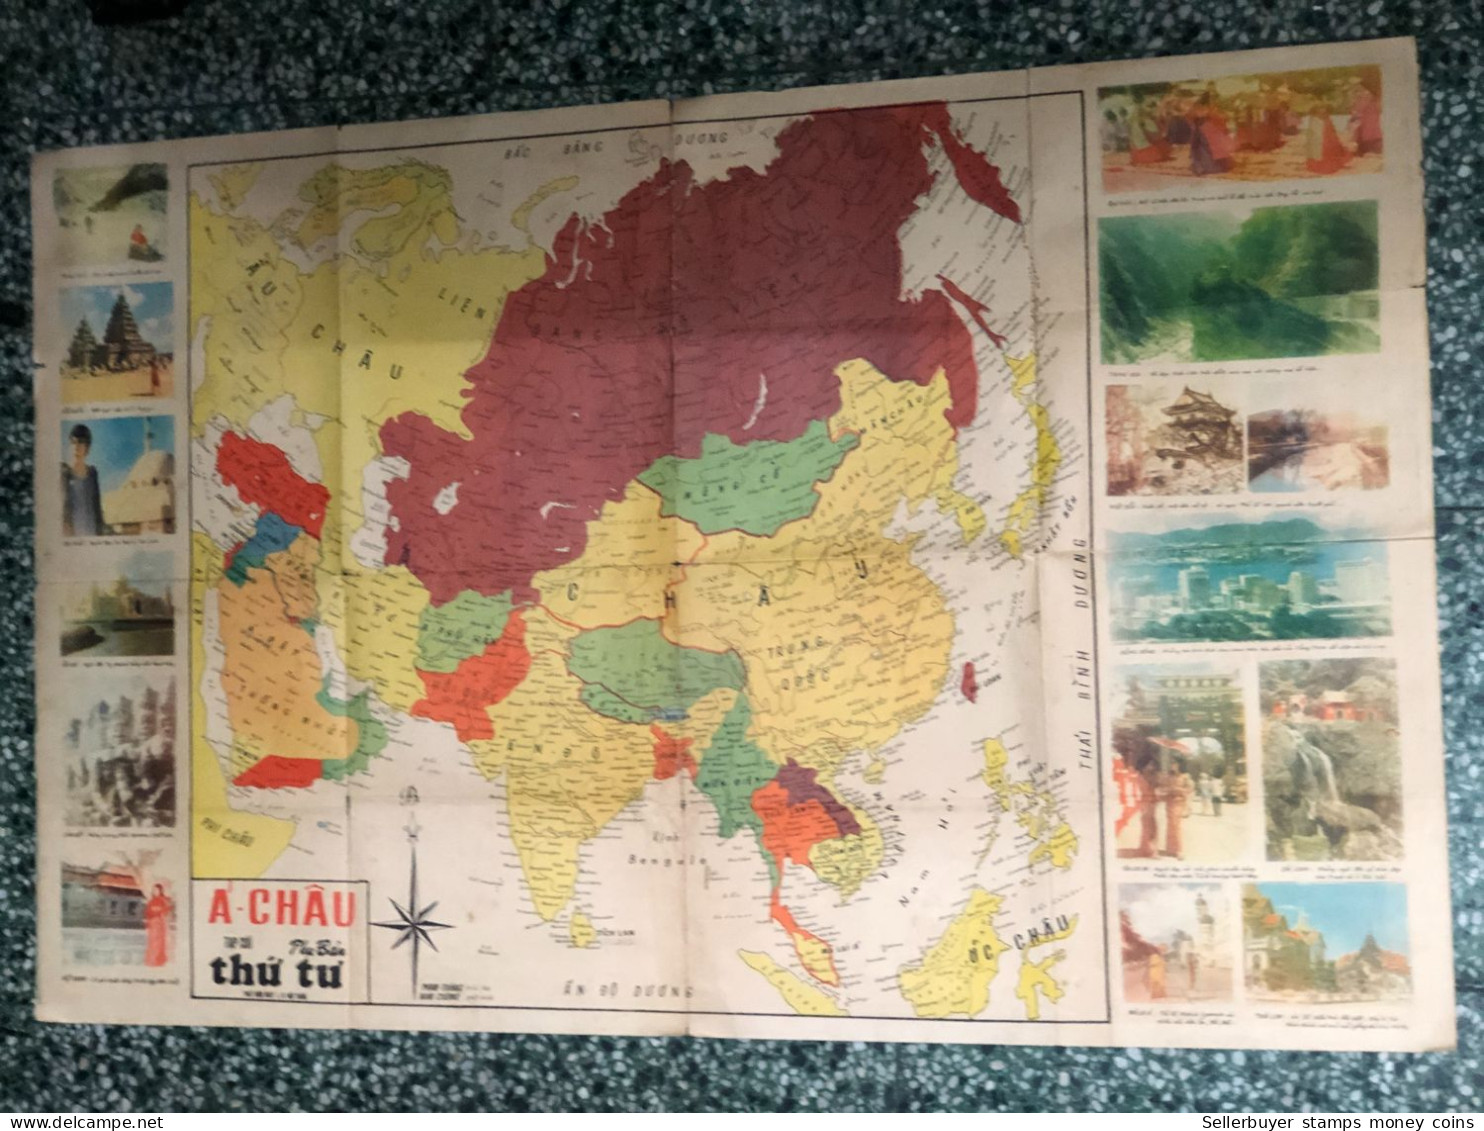 World Maps Old-a Chau Tap Chi Before 1975-1 Pcs - Topographical Maps